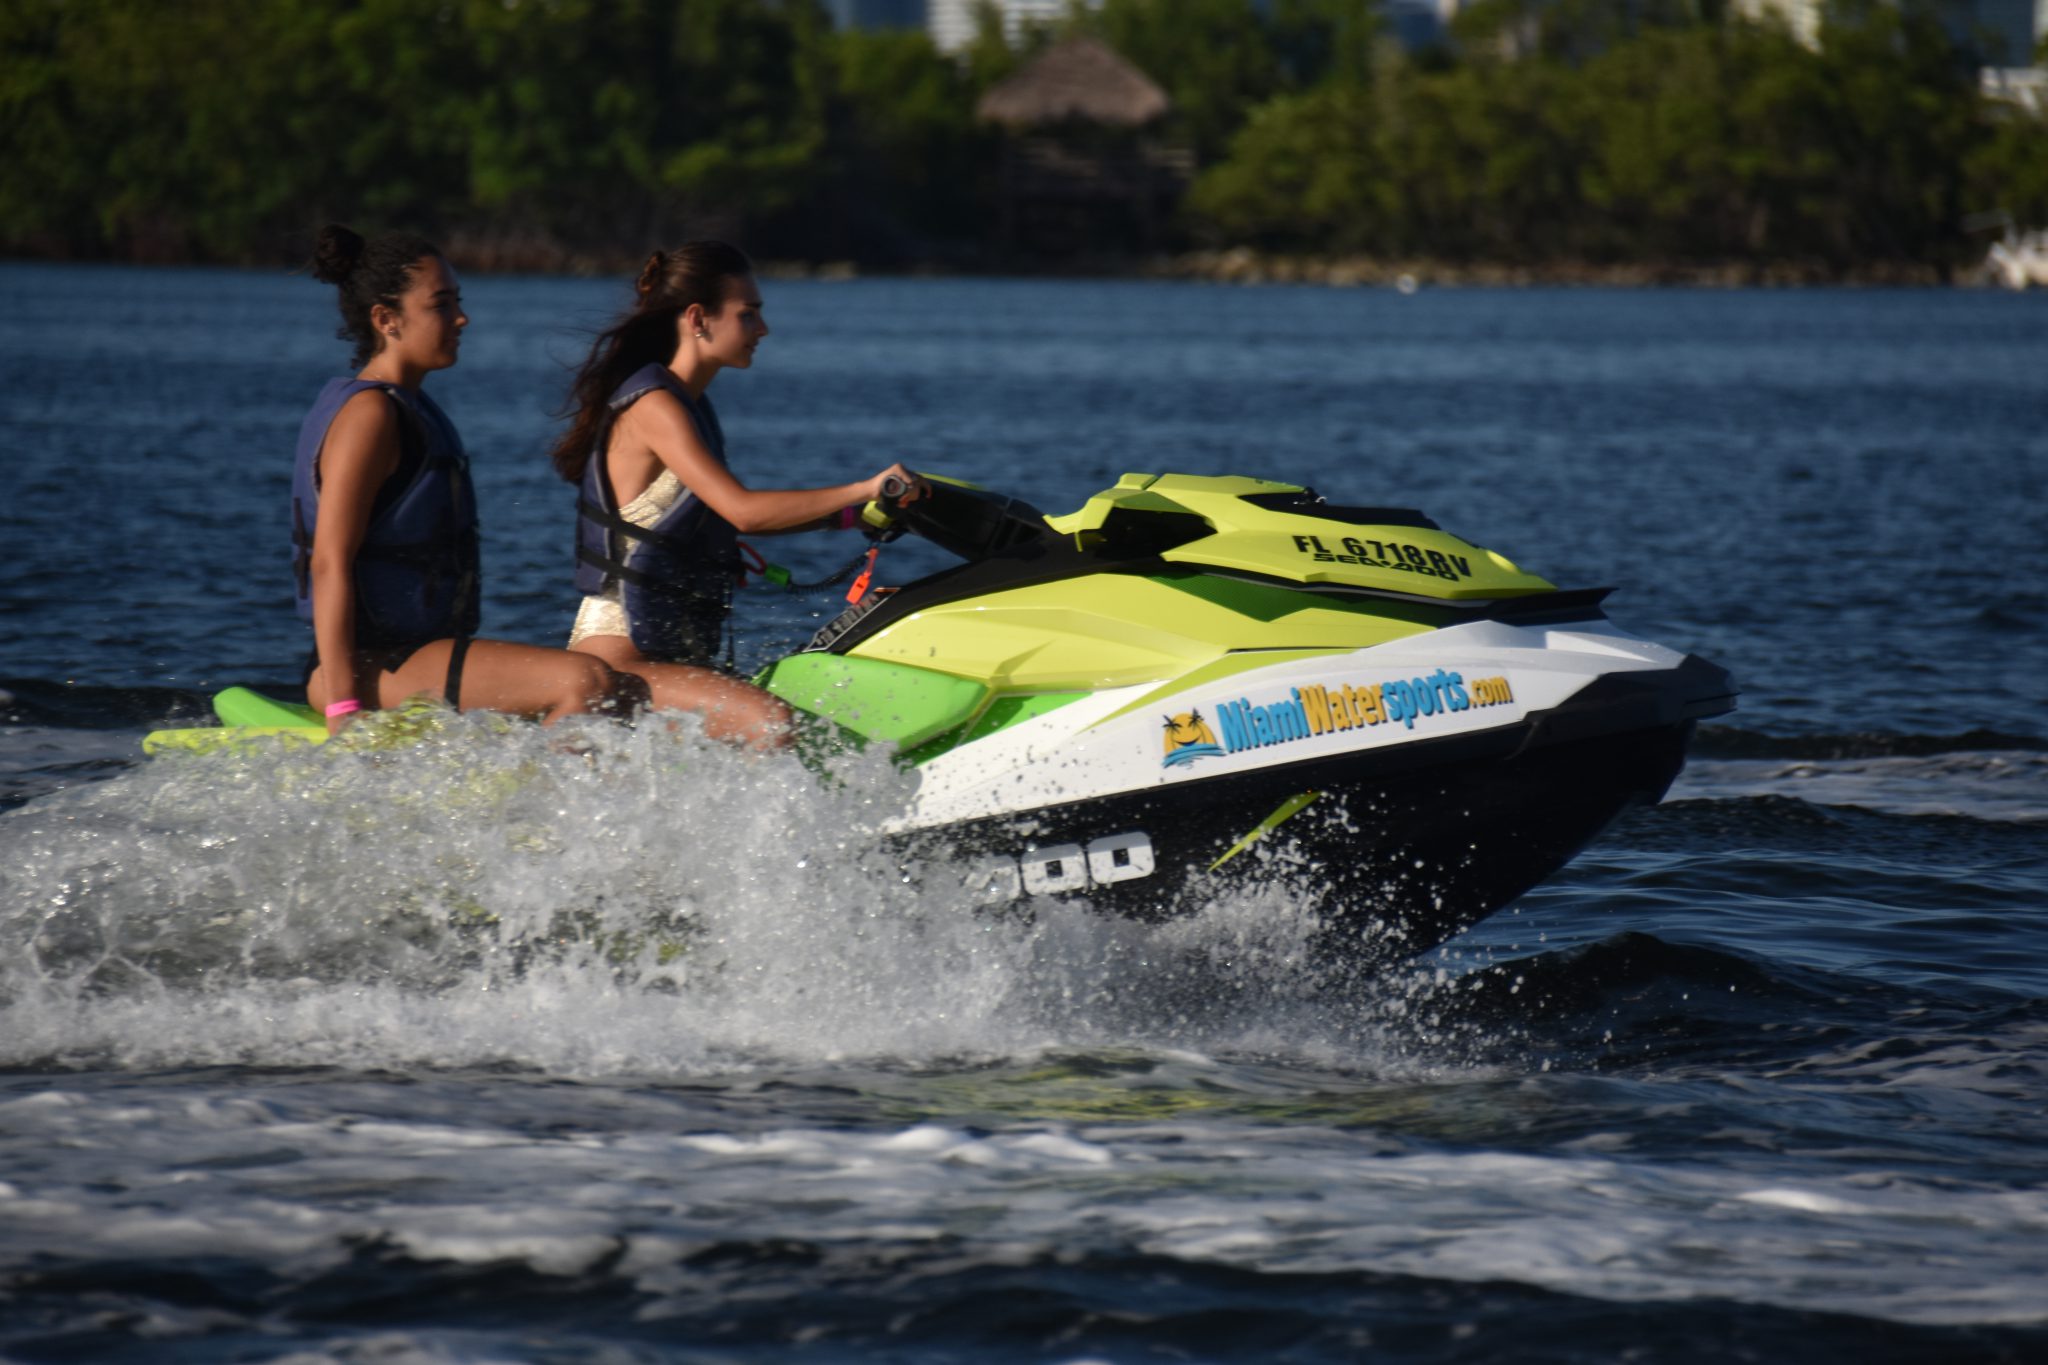 Jet Ski Safety in Miami, What You Need to Know